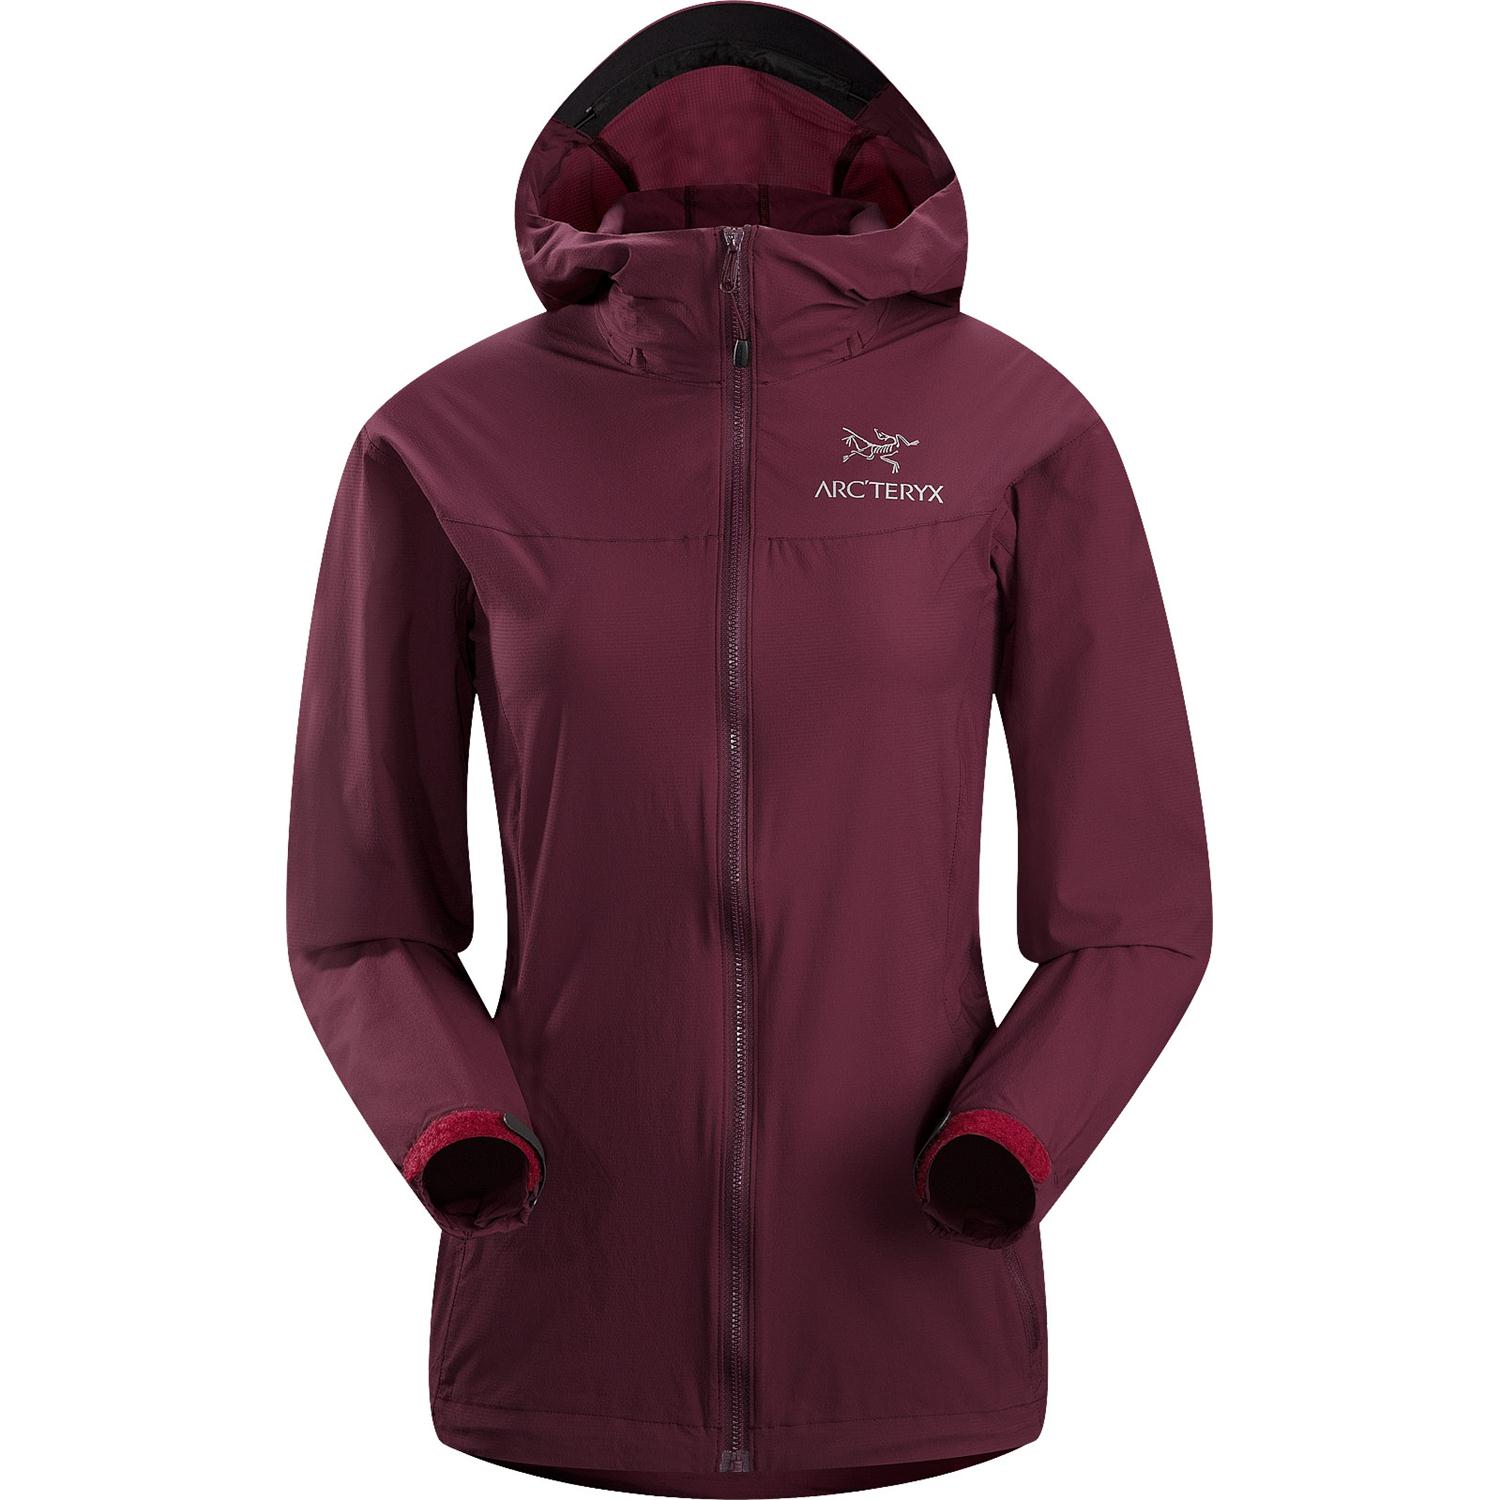 Arc'teryx Squamish Hoodie - Women's | evo outlet